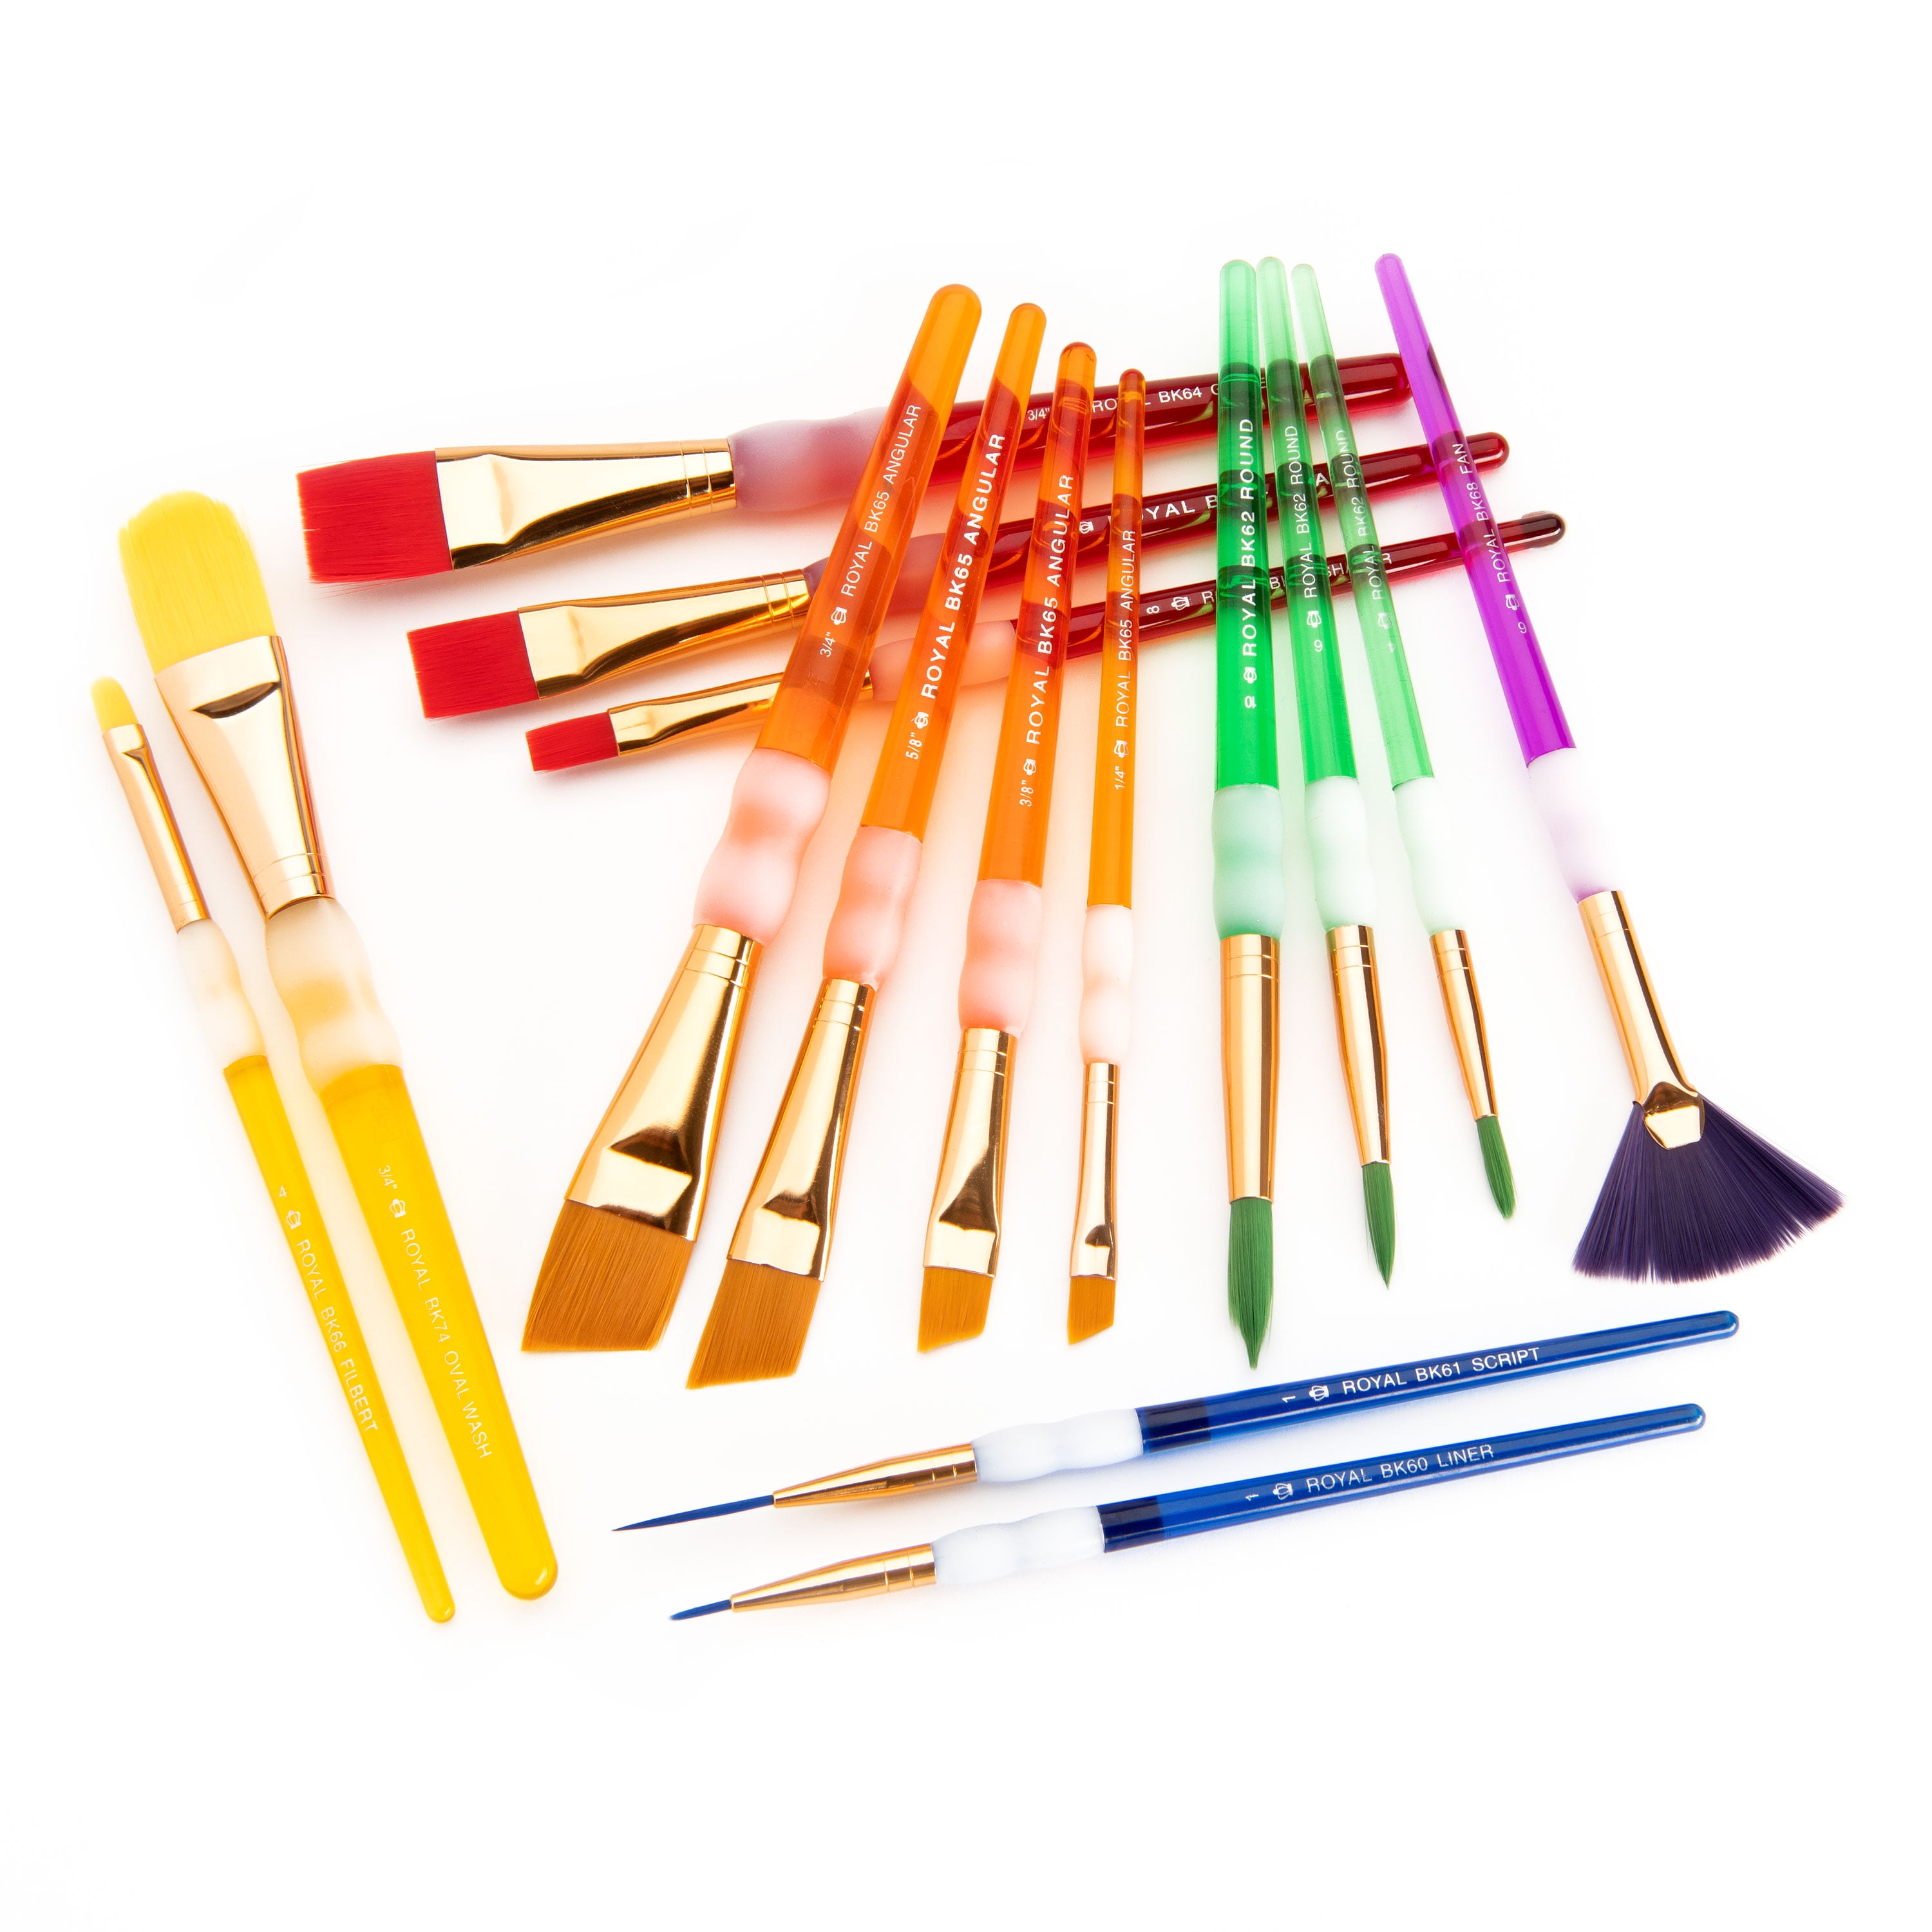 Ledg Beginners Paint by Number Kit - PBN Art Set with Wood Handle Paint  Brushes, Instructions Sets, Paint by Numbers for Kids, Kits Include 12 x